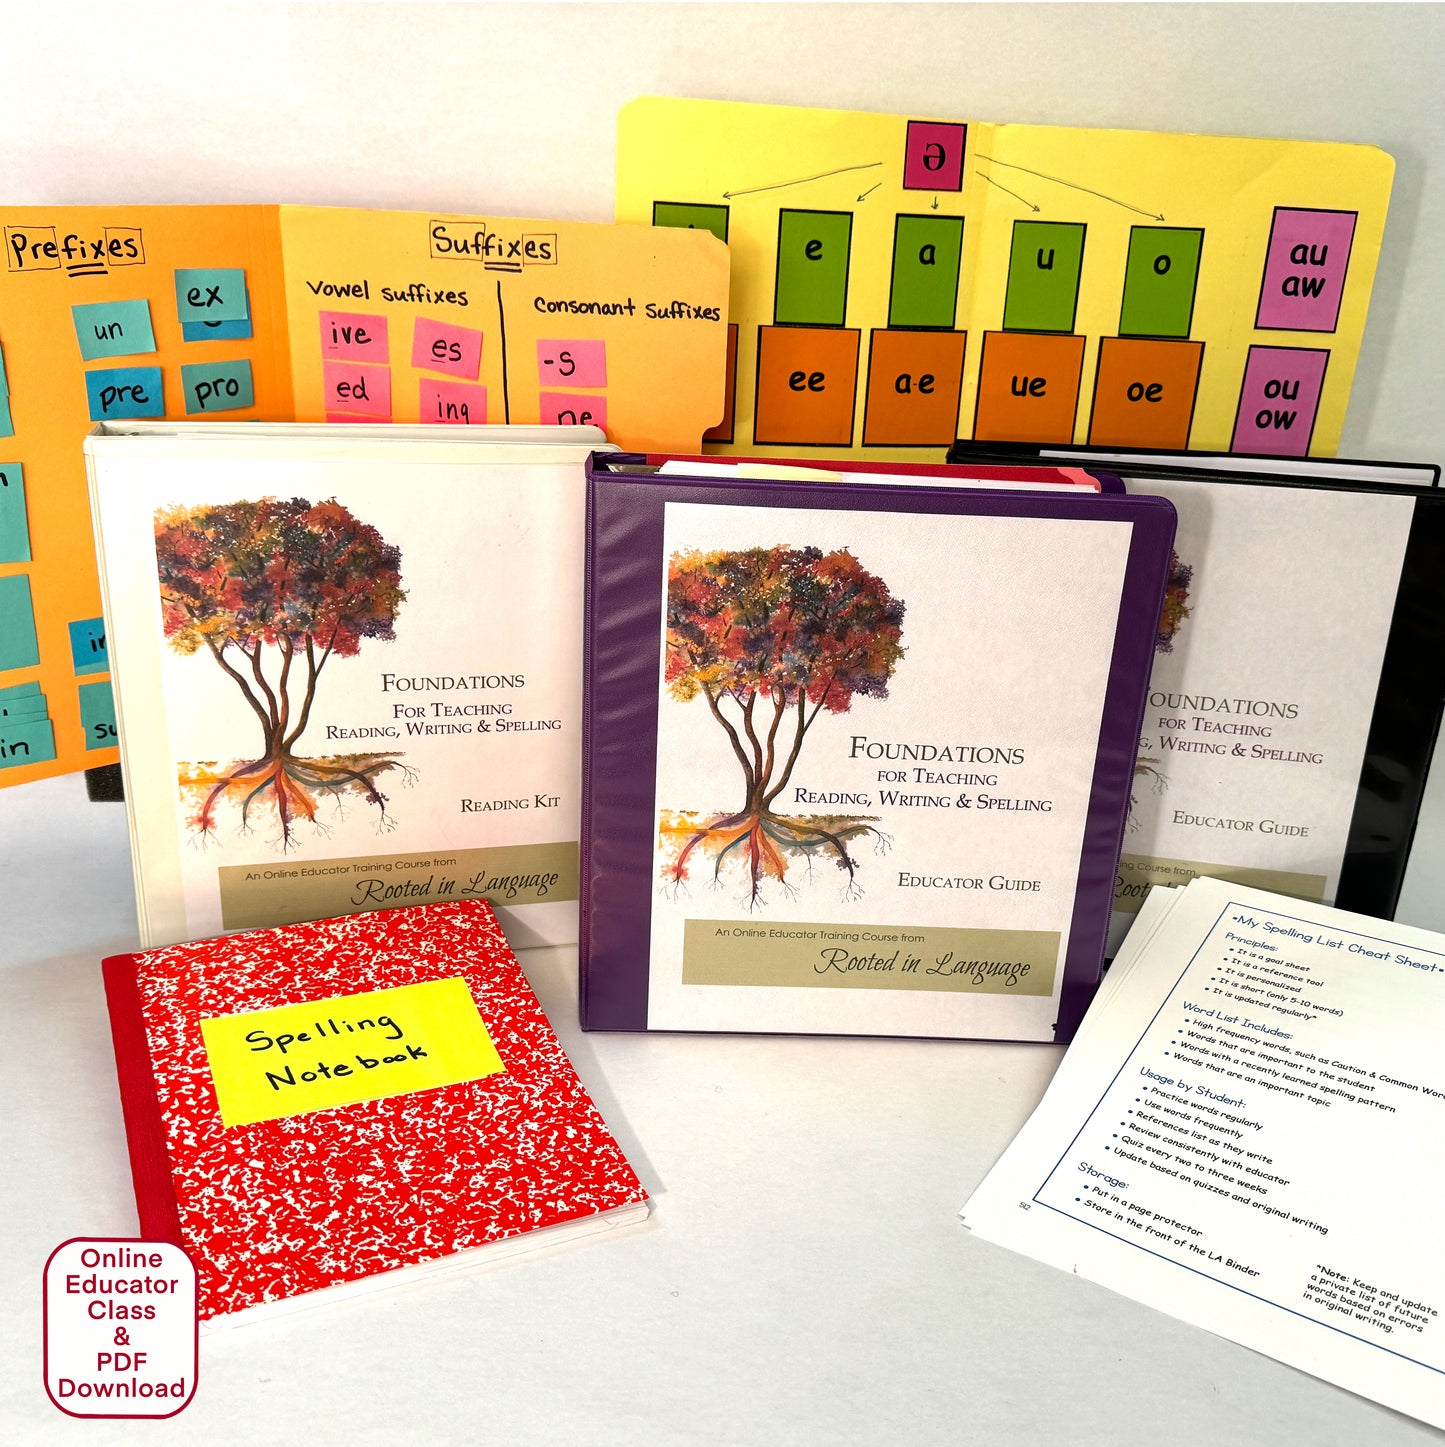 Foundations for Teaching Reading, Writing & Spelling Educator Course